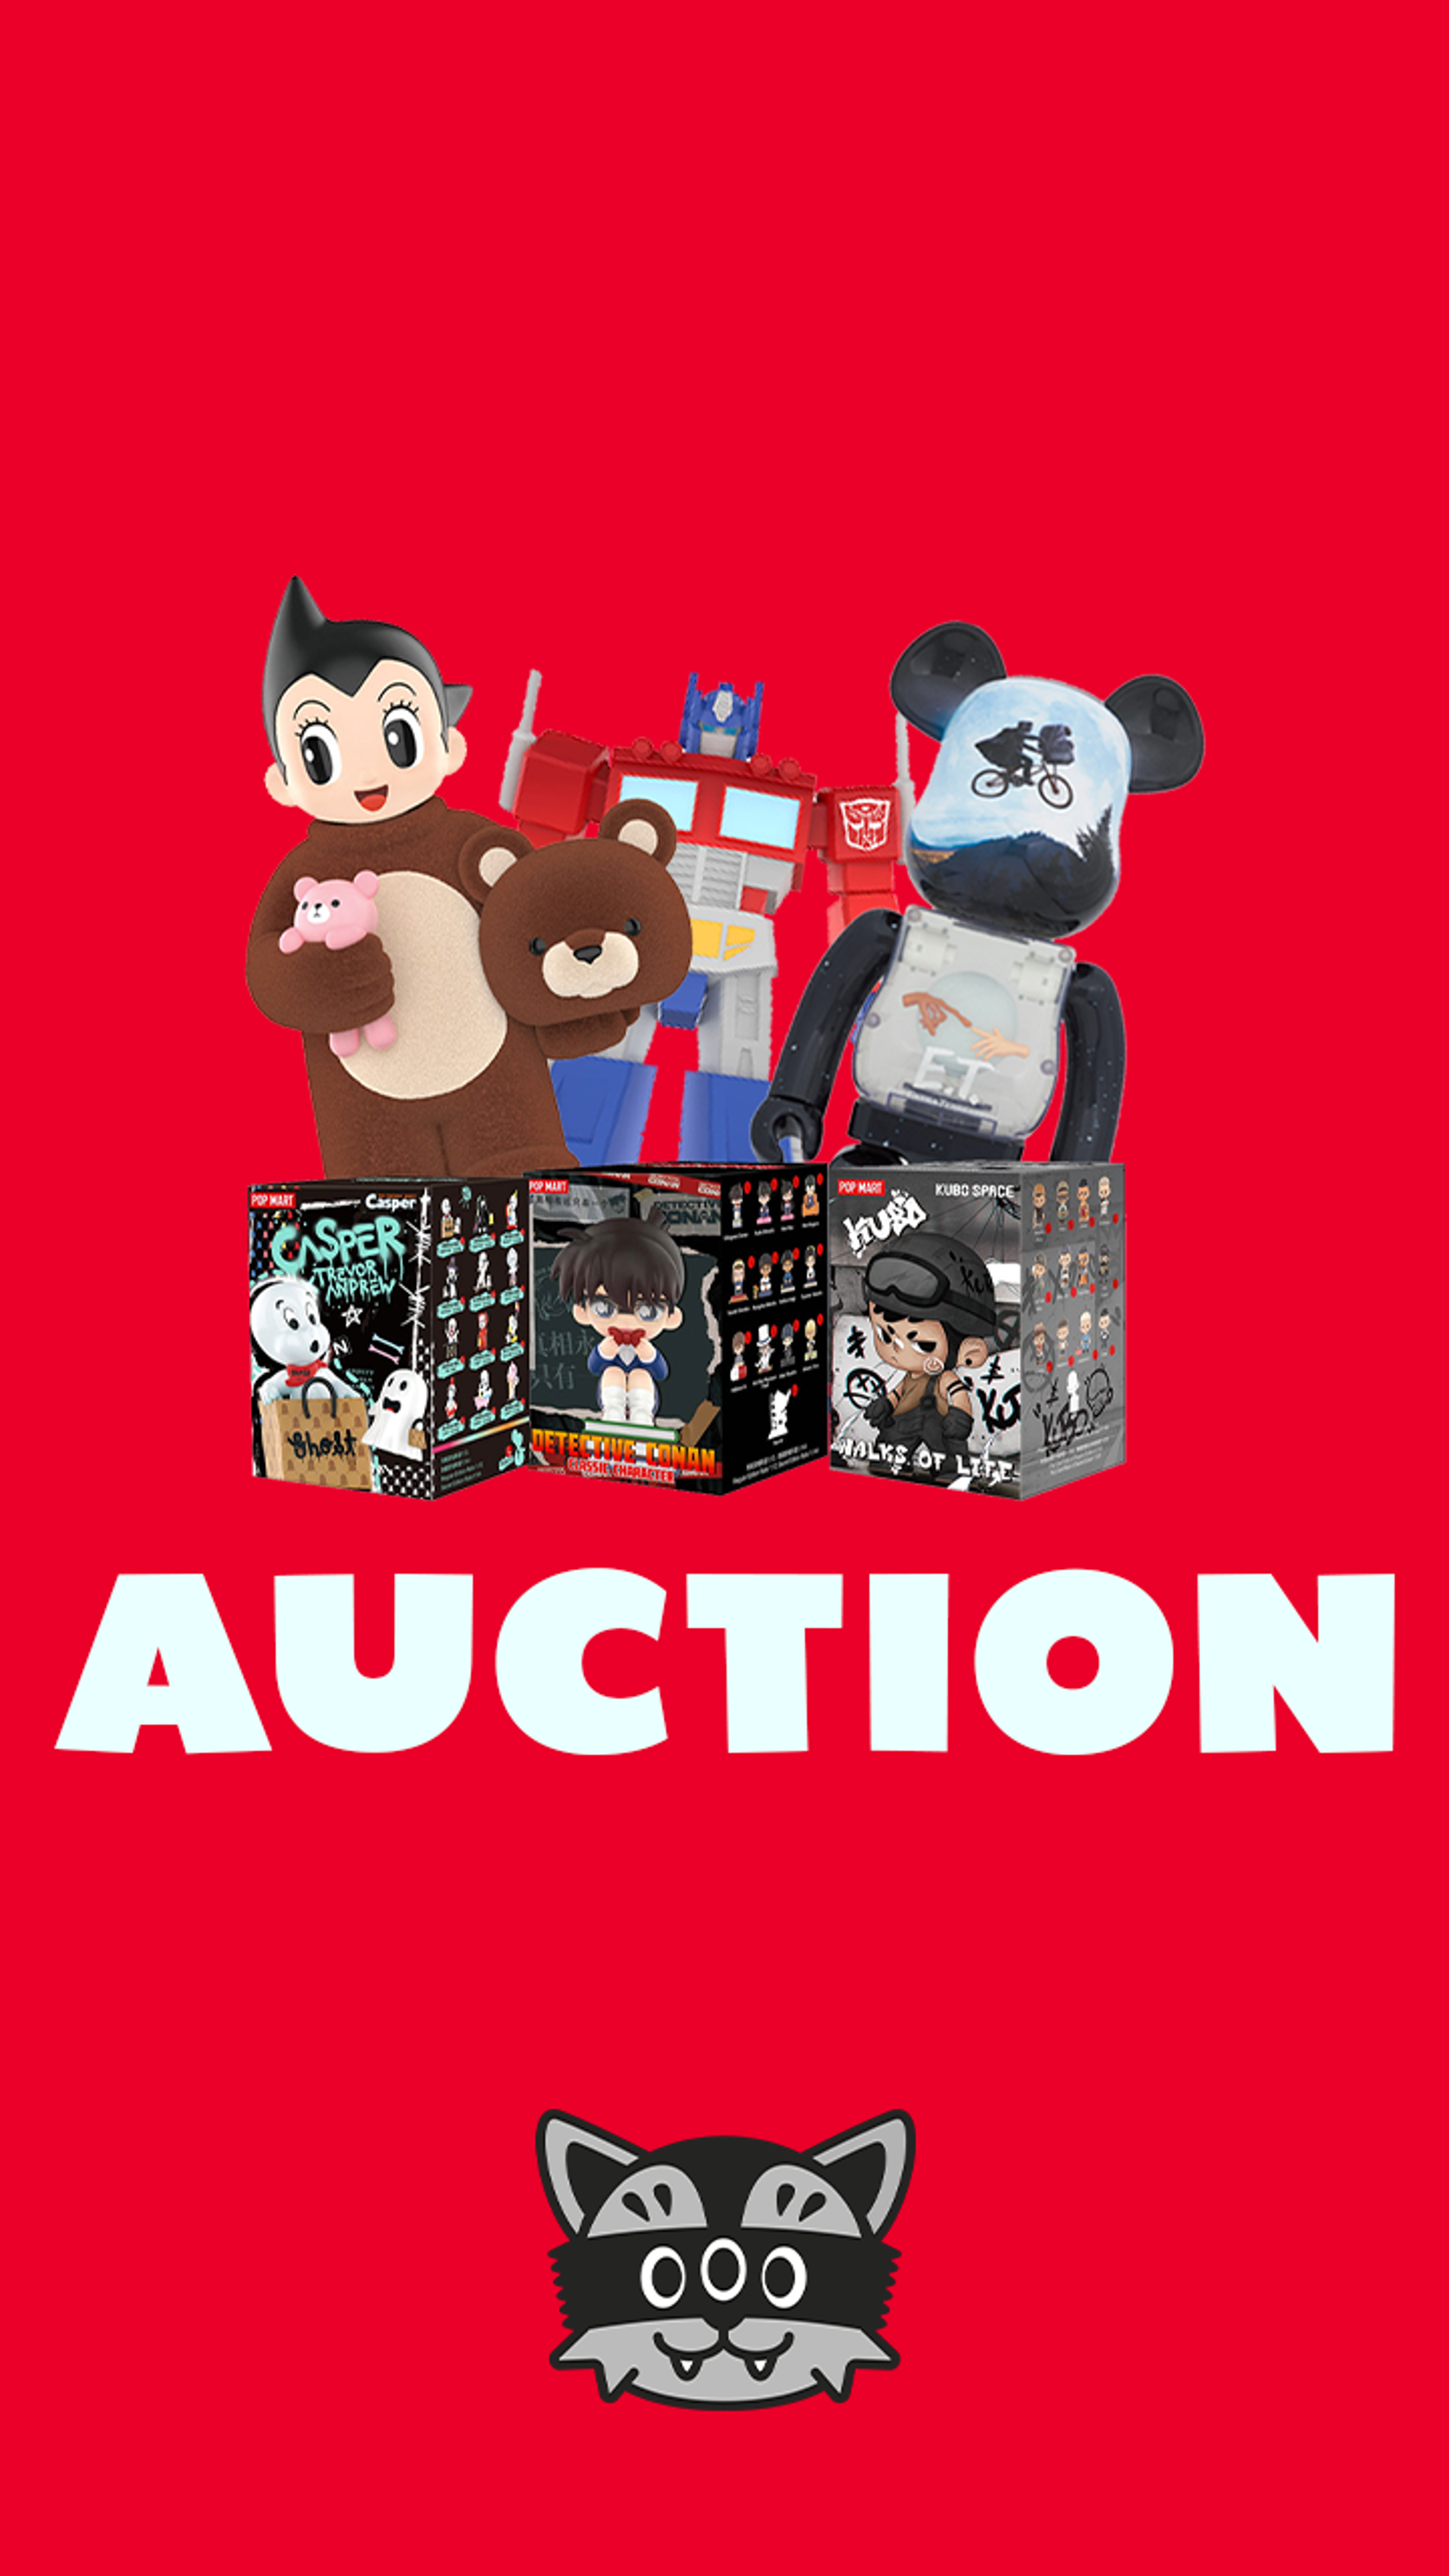 Preview image for the show titled "Mindzai Auction - April 29" at Today @ 5:00 PM